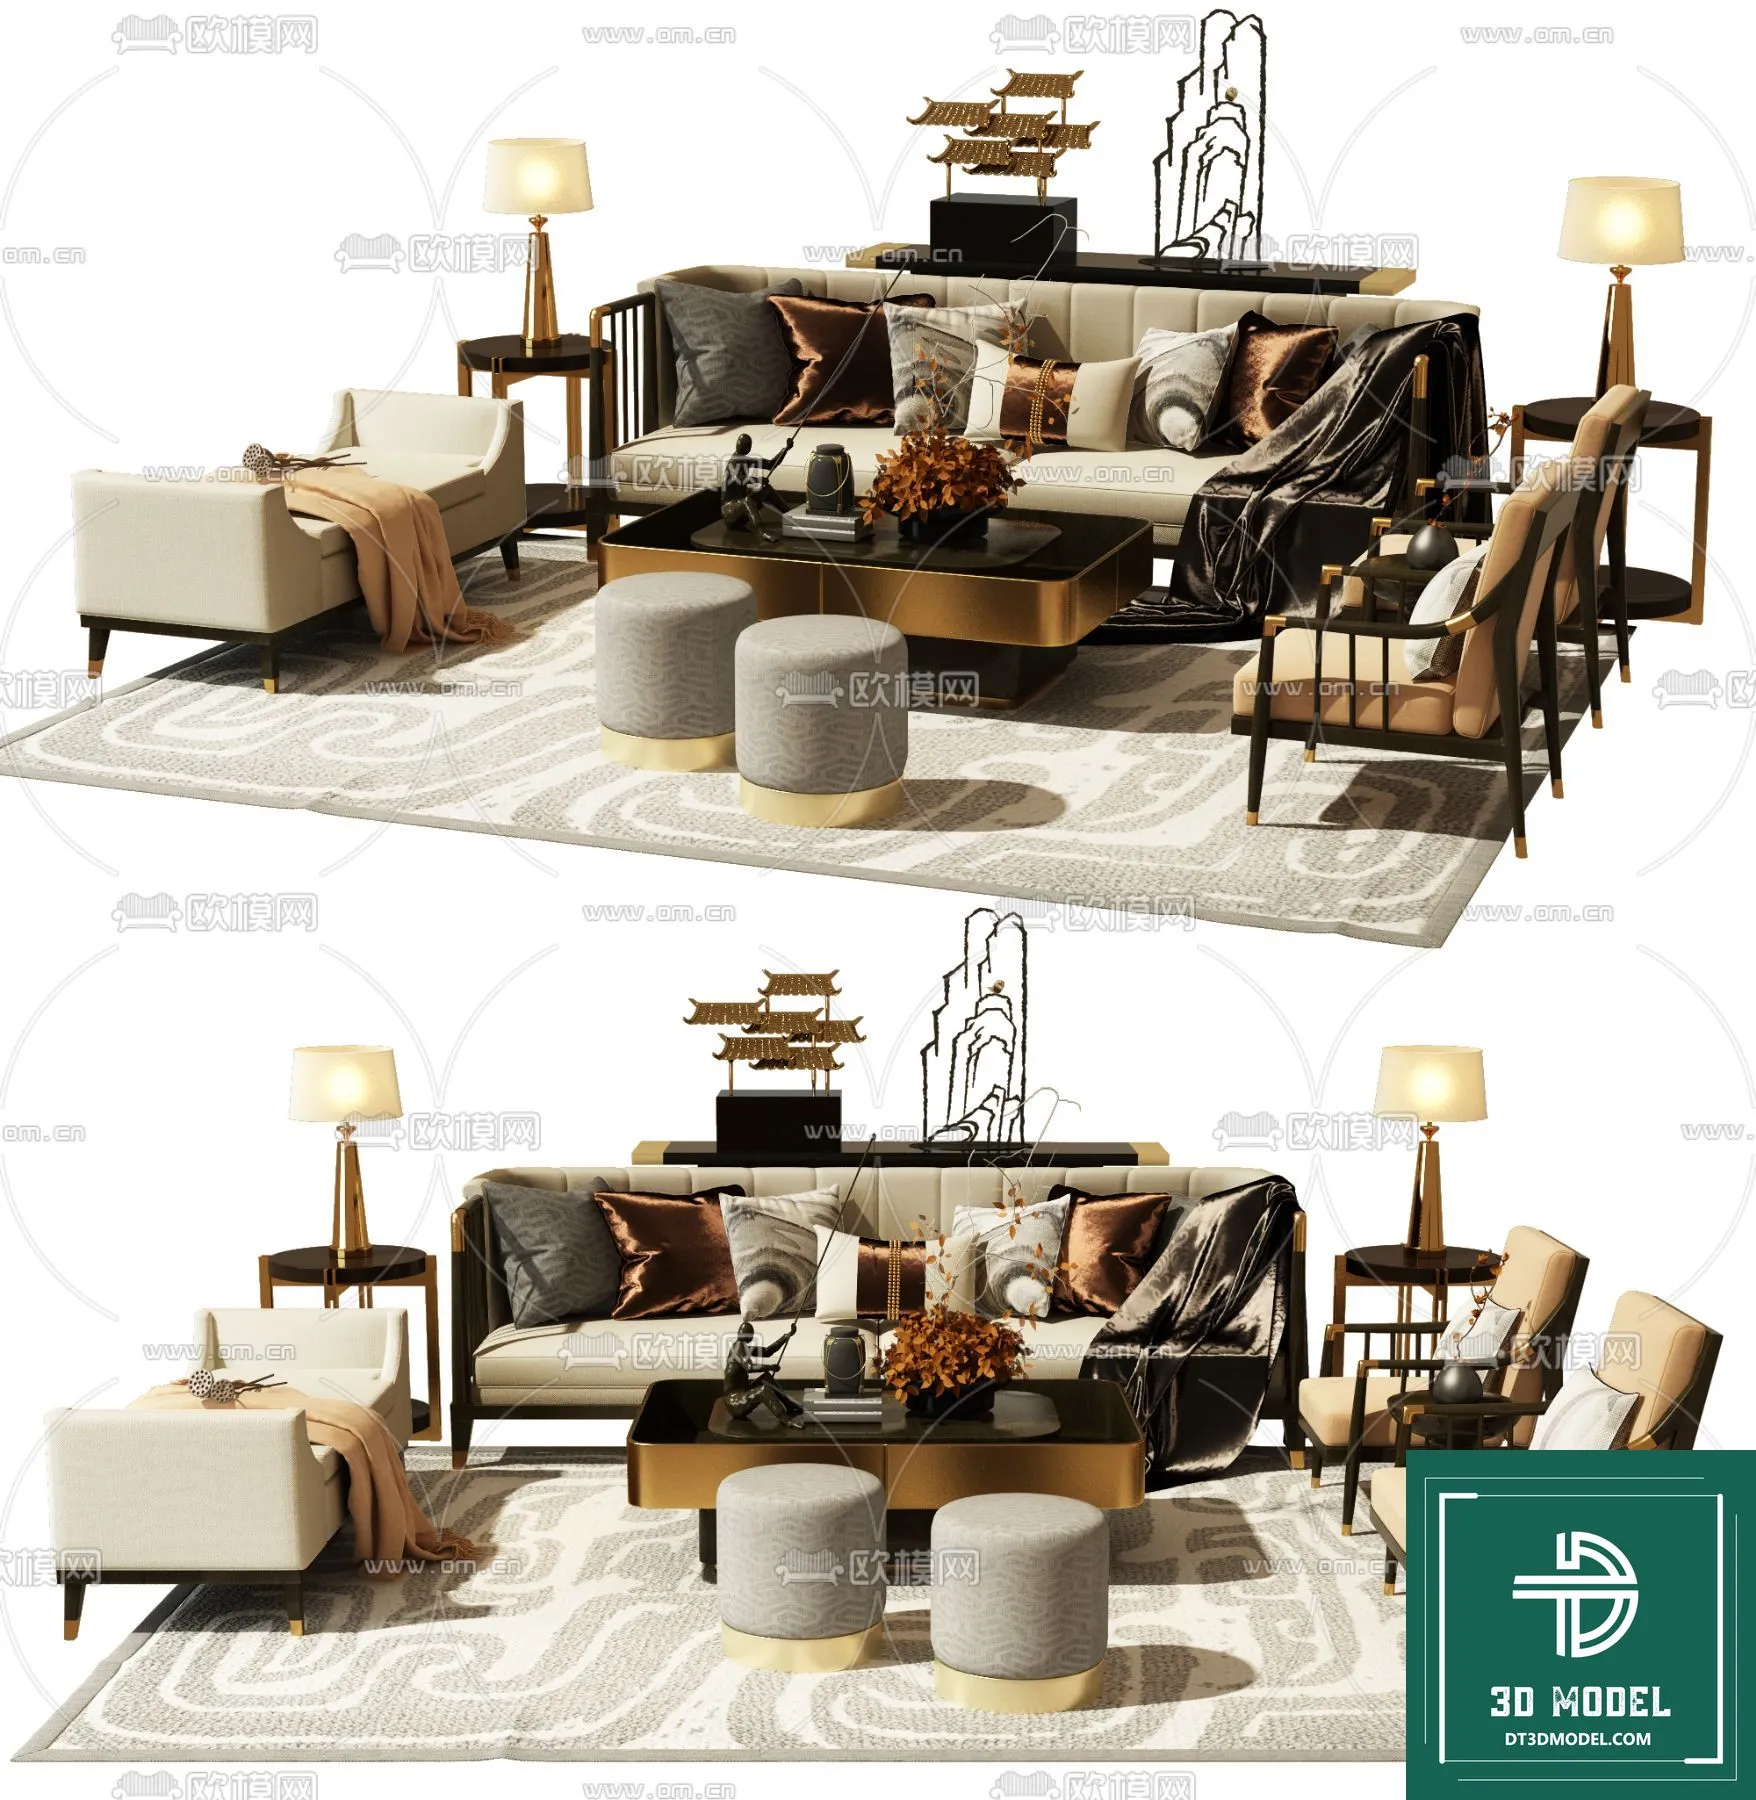 INDOCHINE STYLE – 3D MODELS – 507